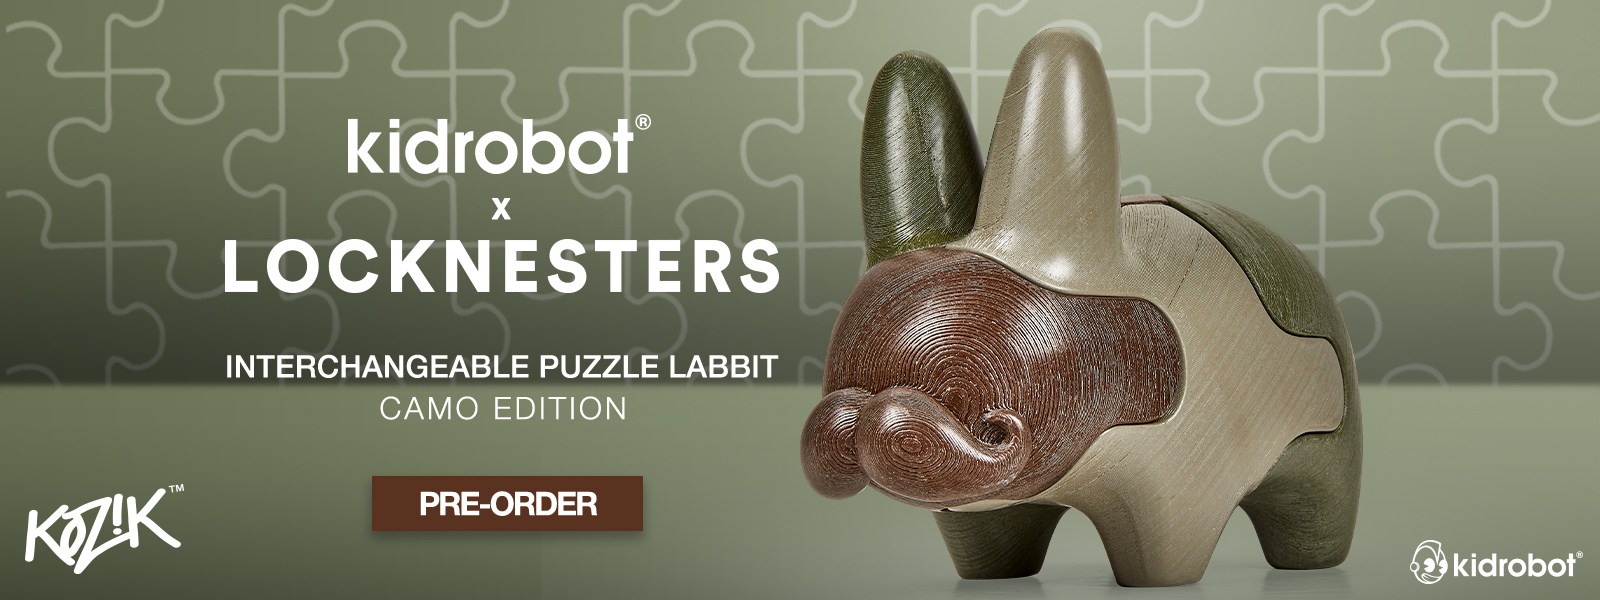 Camo Edition of the Locknesters Interchangeable Puzzle Labbit